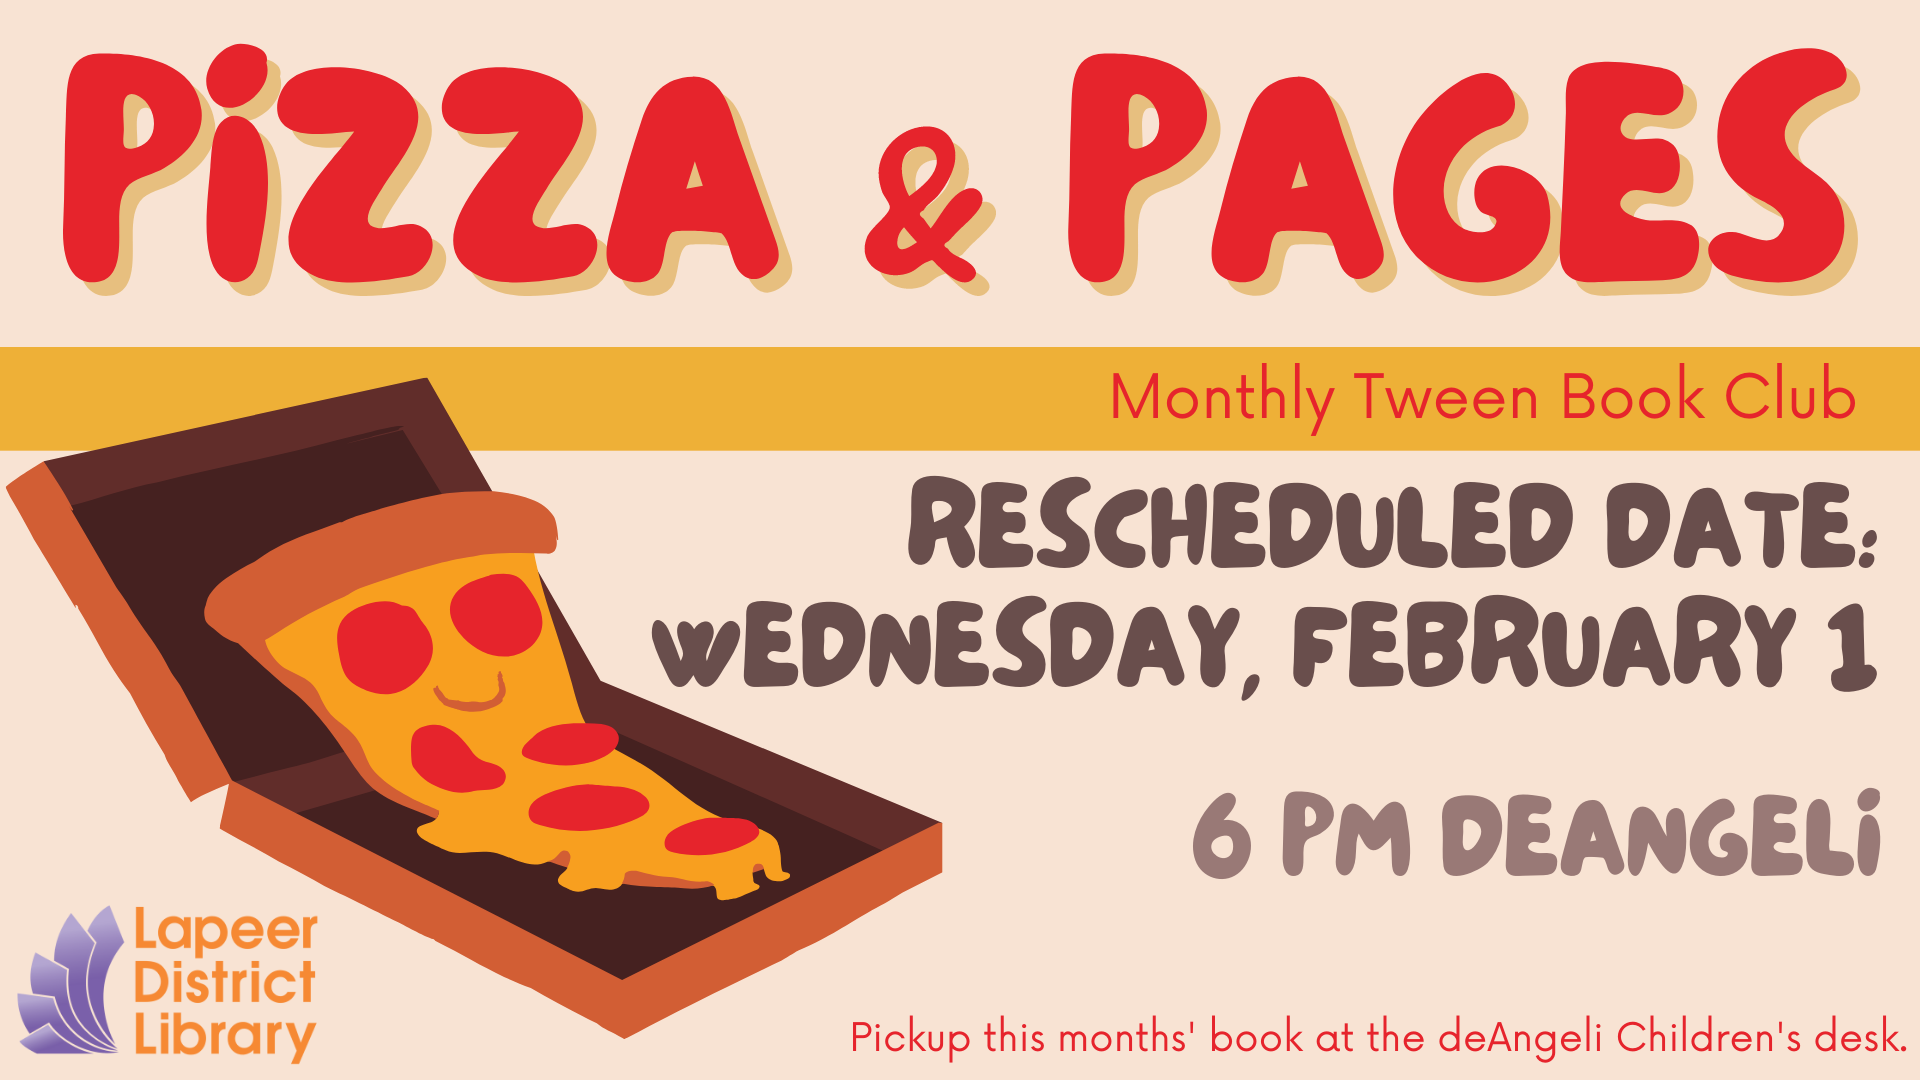 Pizza & Pages reschedule 